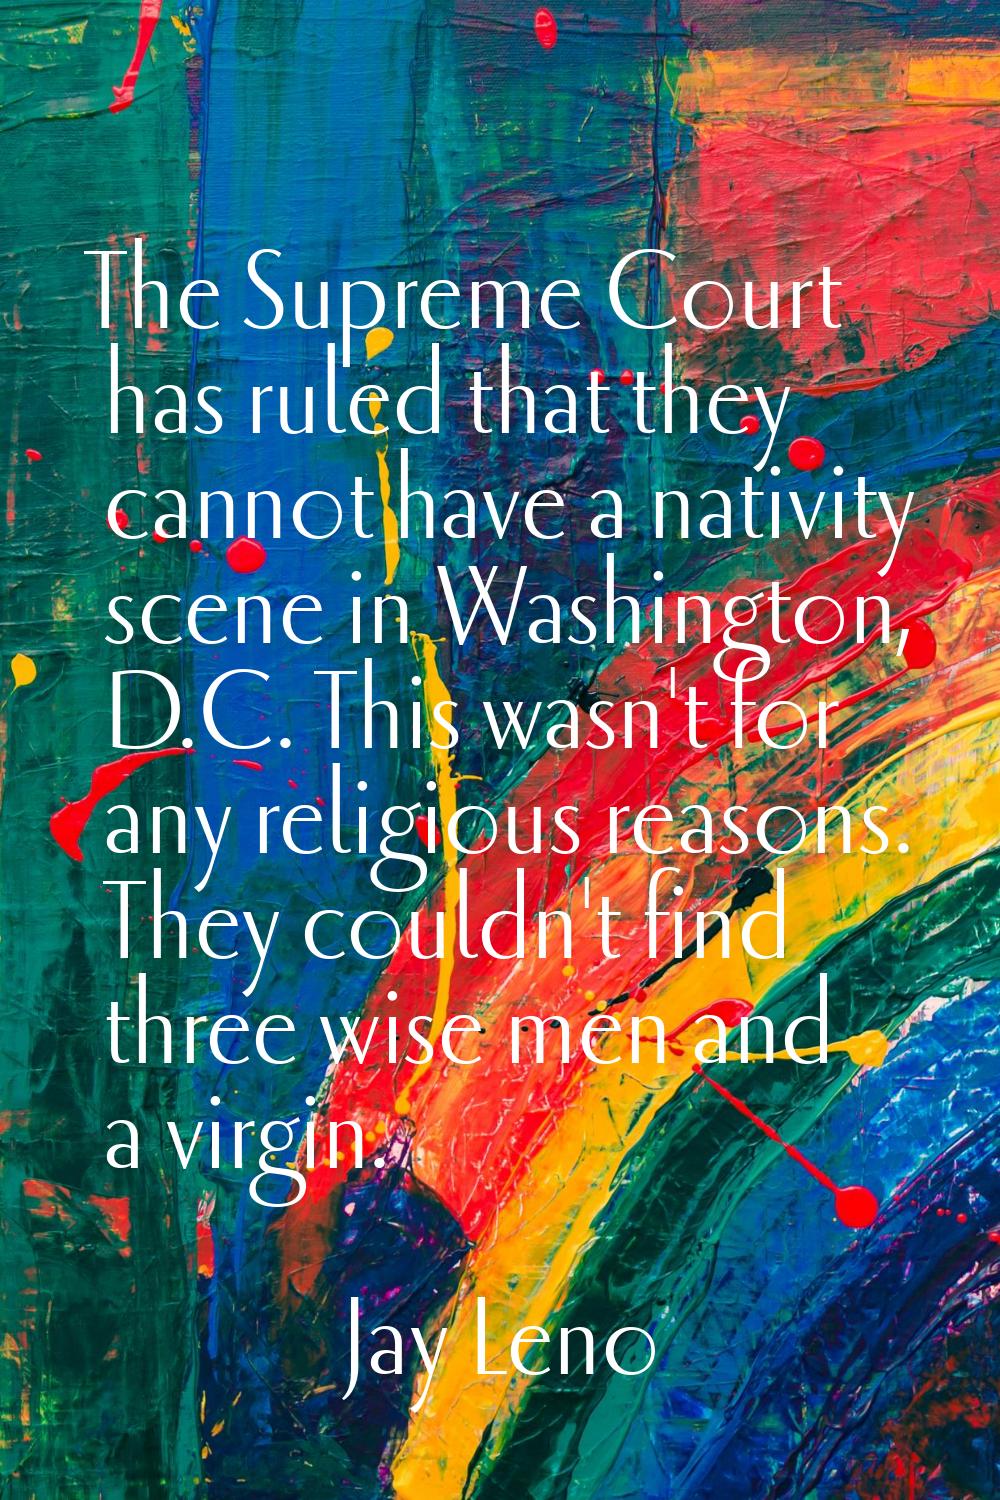 The Supreme Court has ruled that they cannot have a nativity scene in Washington, D.C. This wasn't 